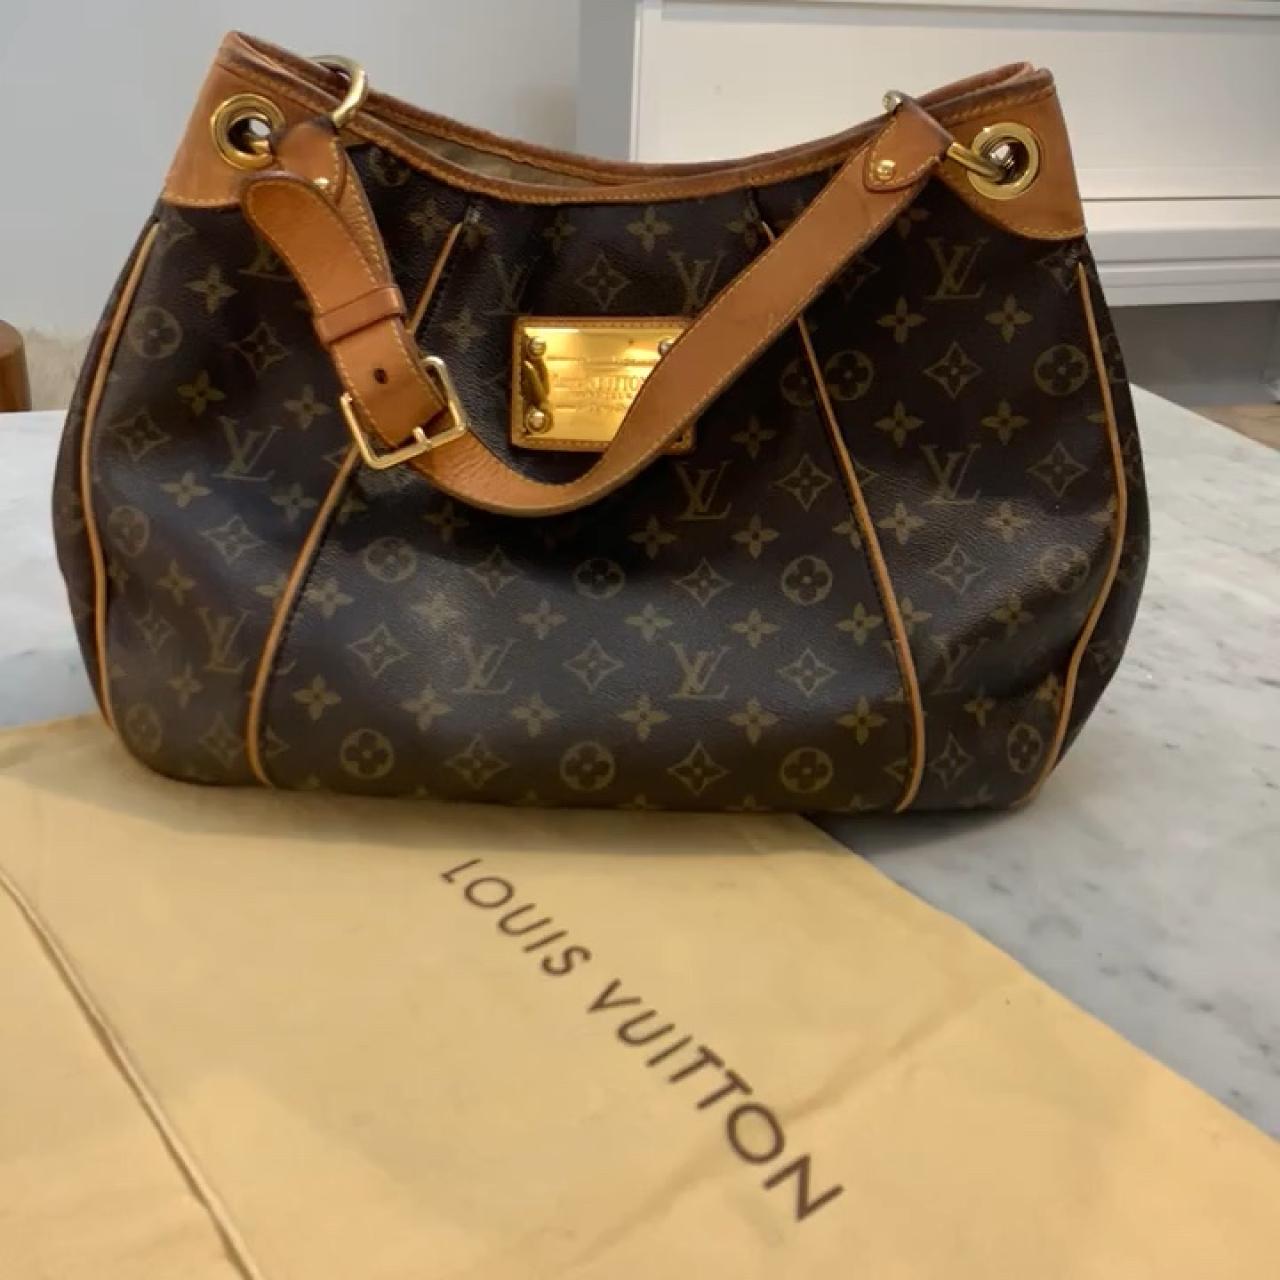 We can't get these Louis Vuitton handbags out of our heads – Emirates Woman